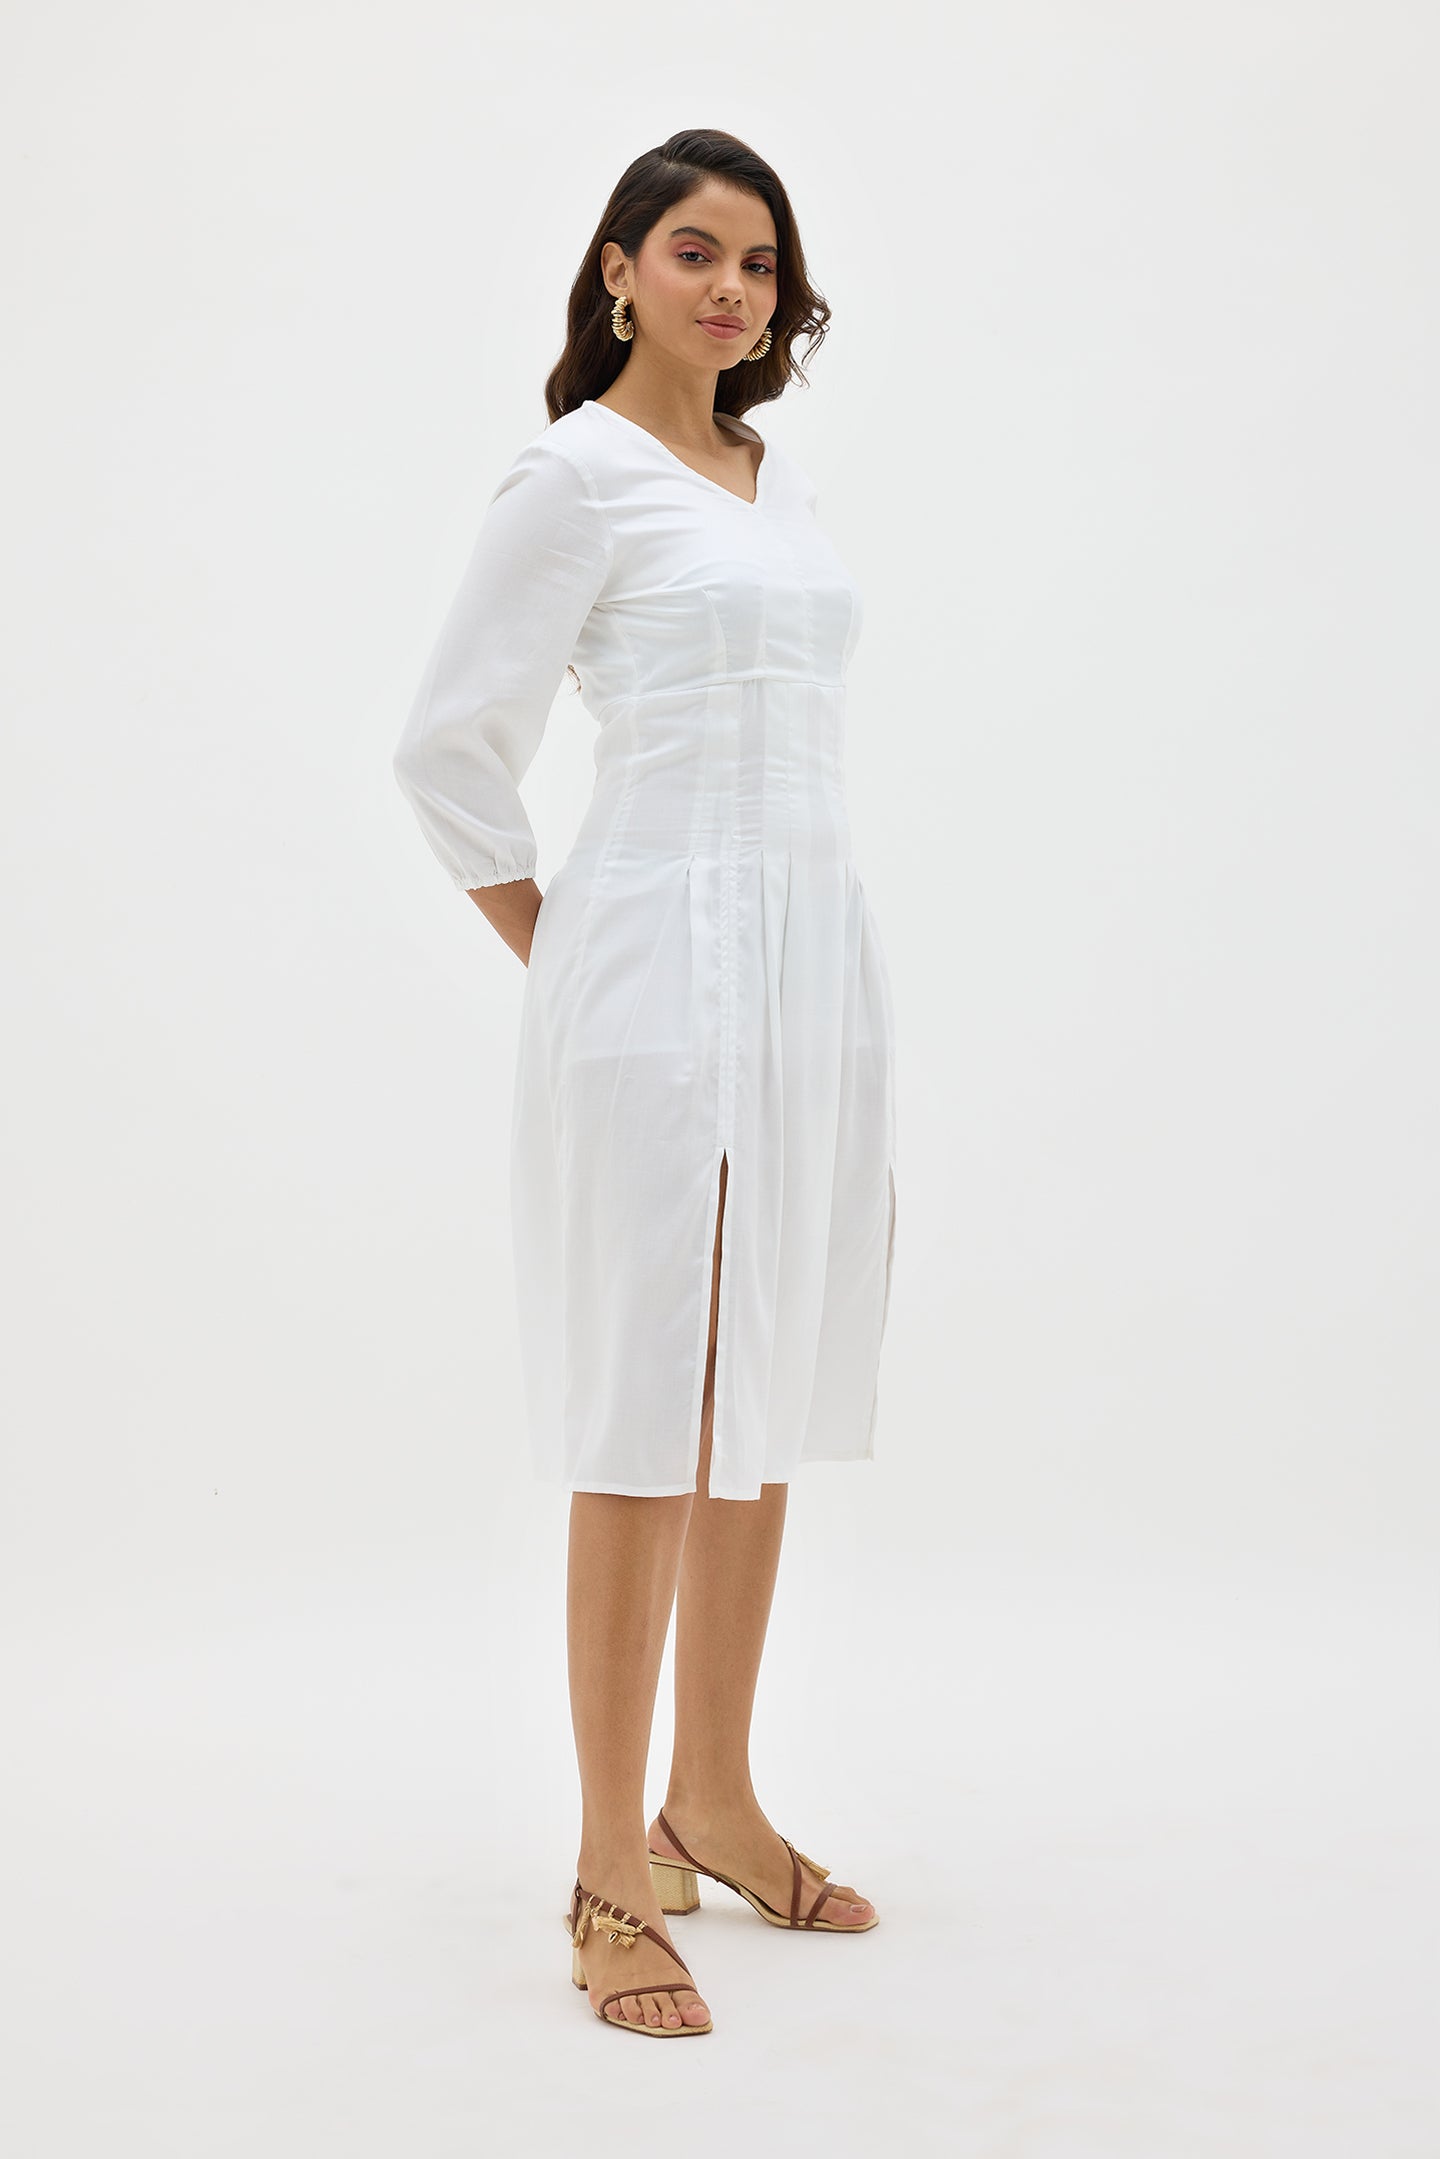 Anida|Breezy cotton fit and flare dress with blouson sleeve